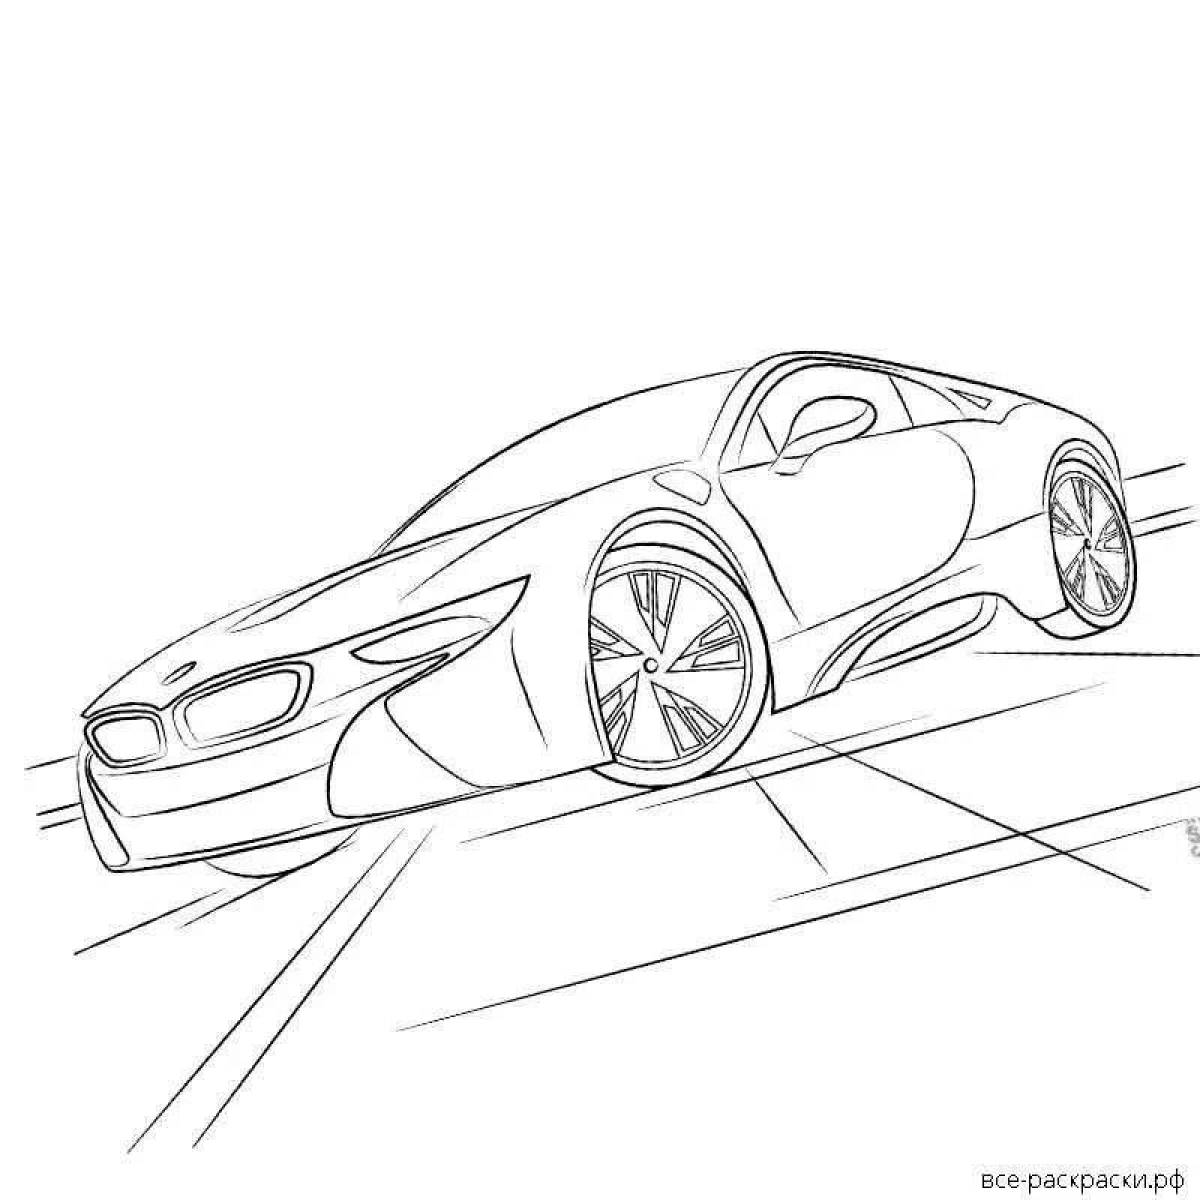 Dazzling bmw i8 coloring book